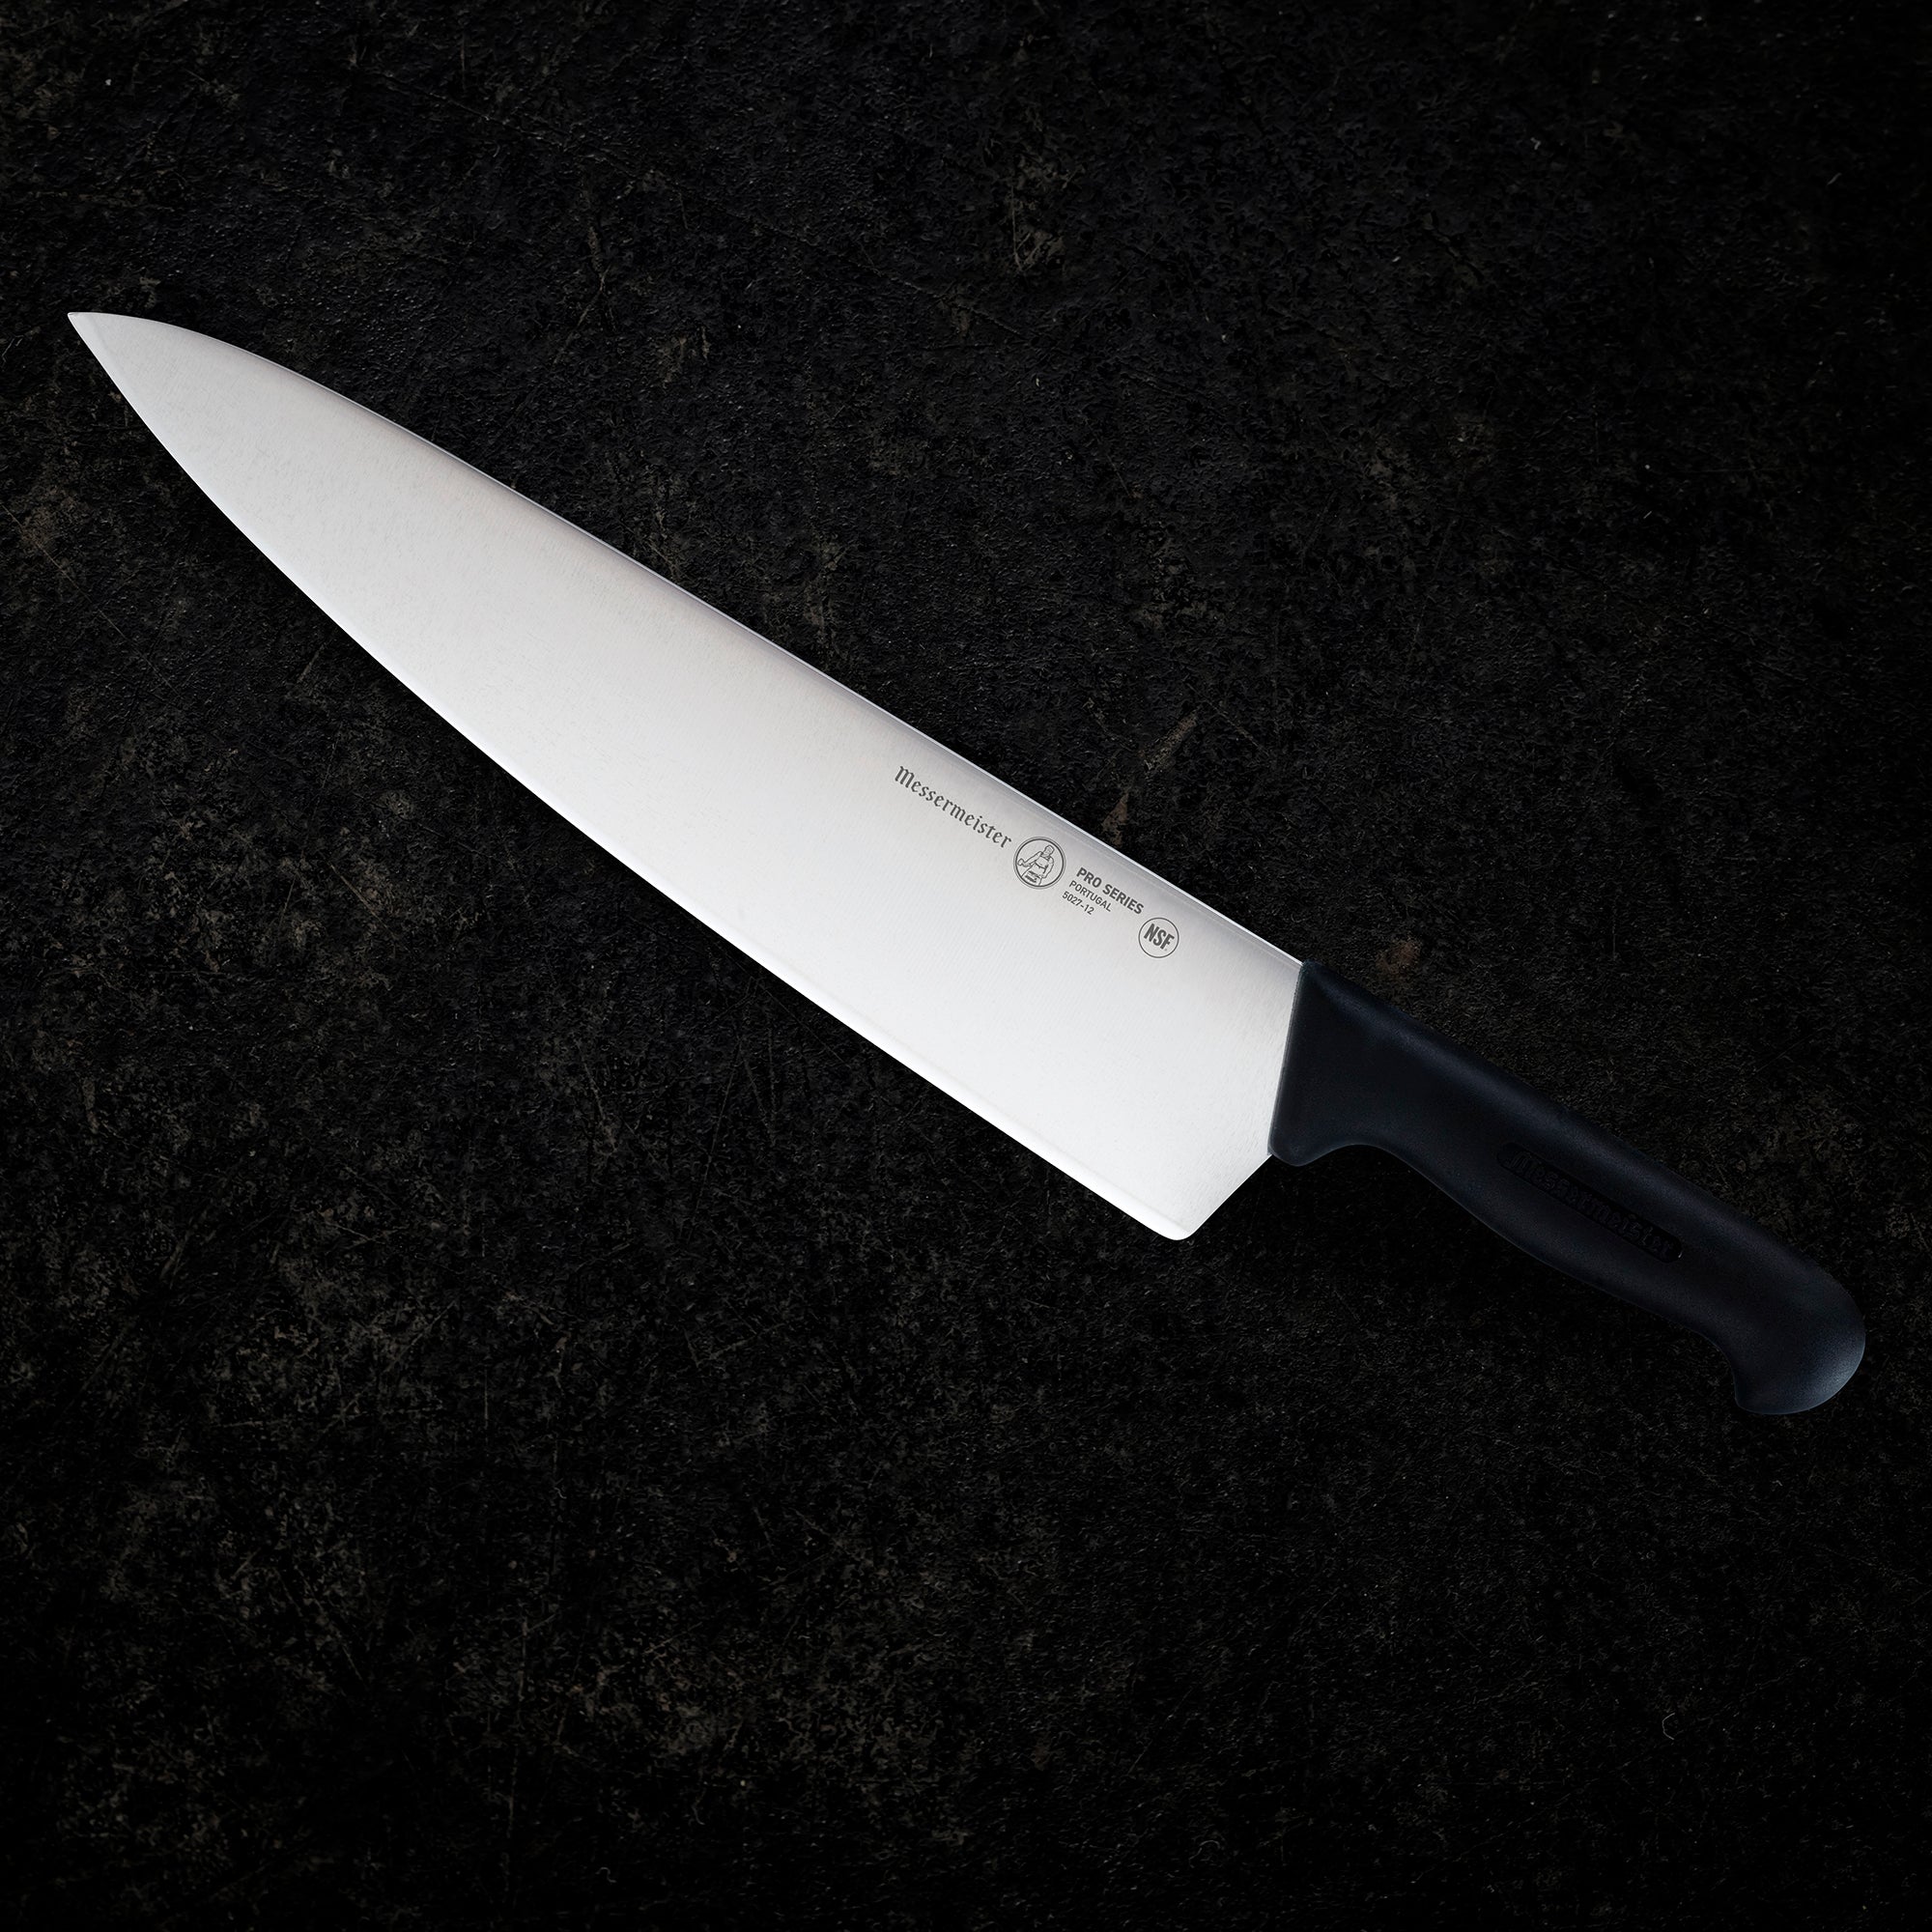 Cutlery-Pro Forged Wide Chef Knife, 8-Inch Blade, 8 Chef Knife